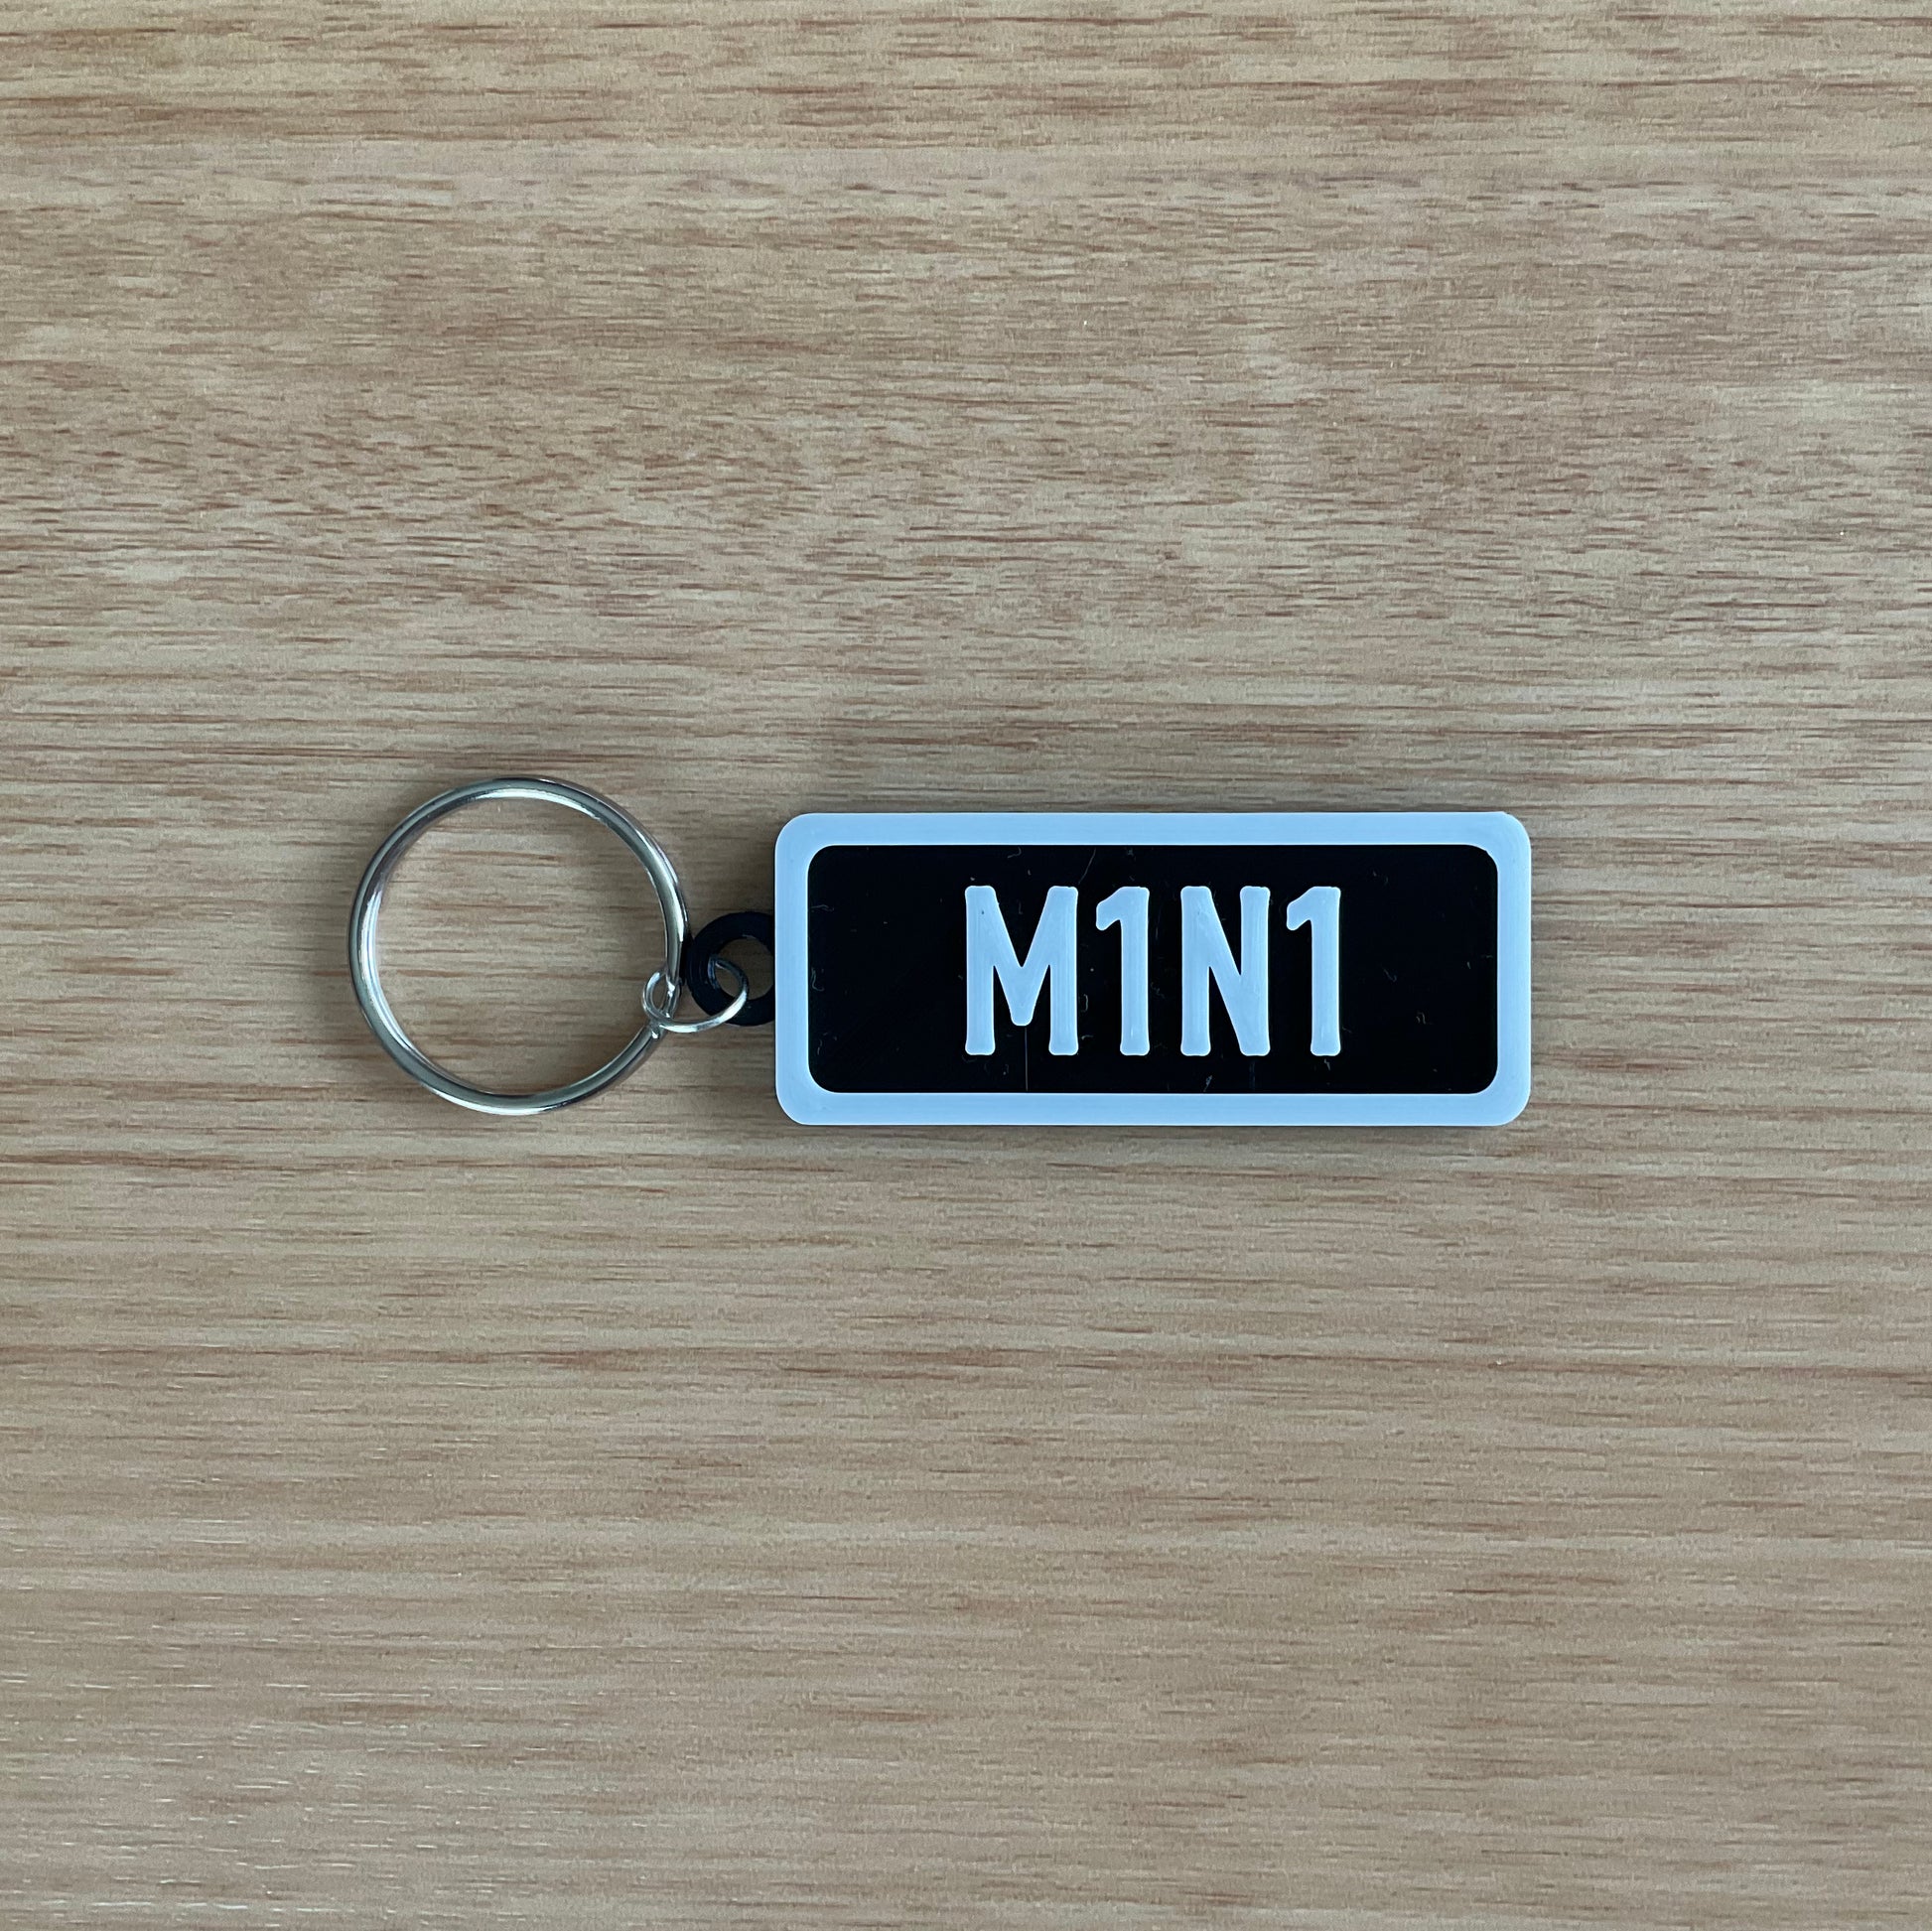 A picture of the Mini keychain in black with white lettering and boarder.